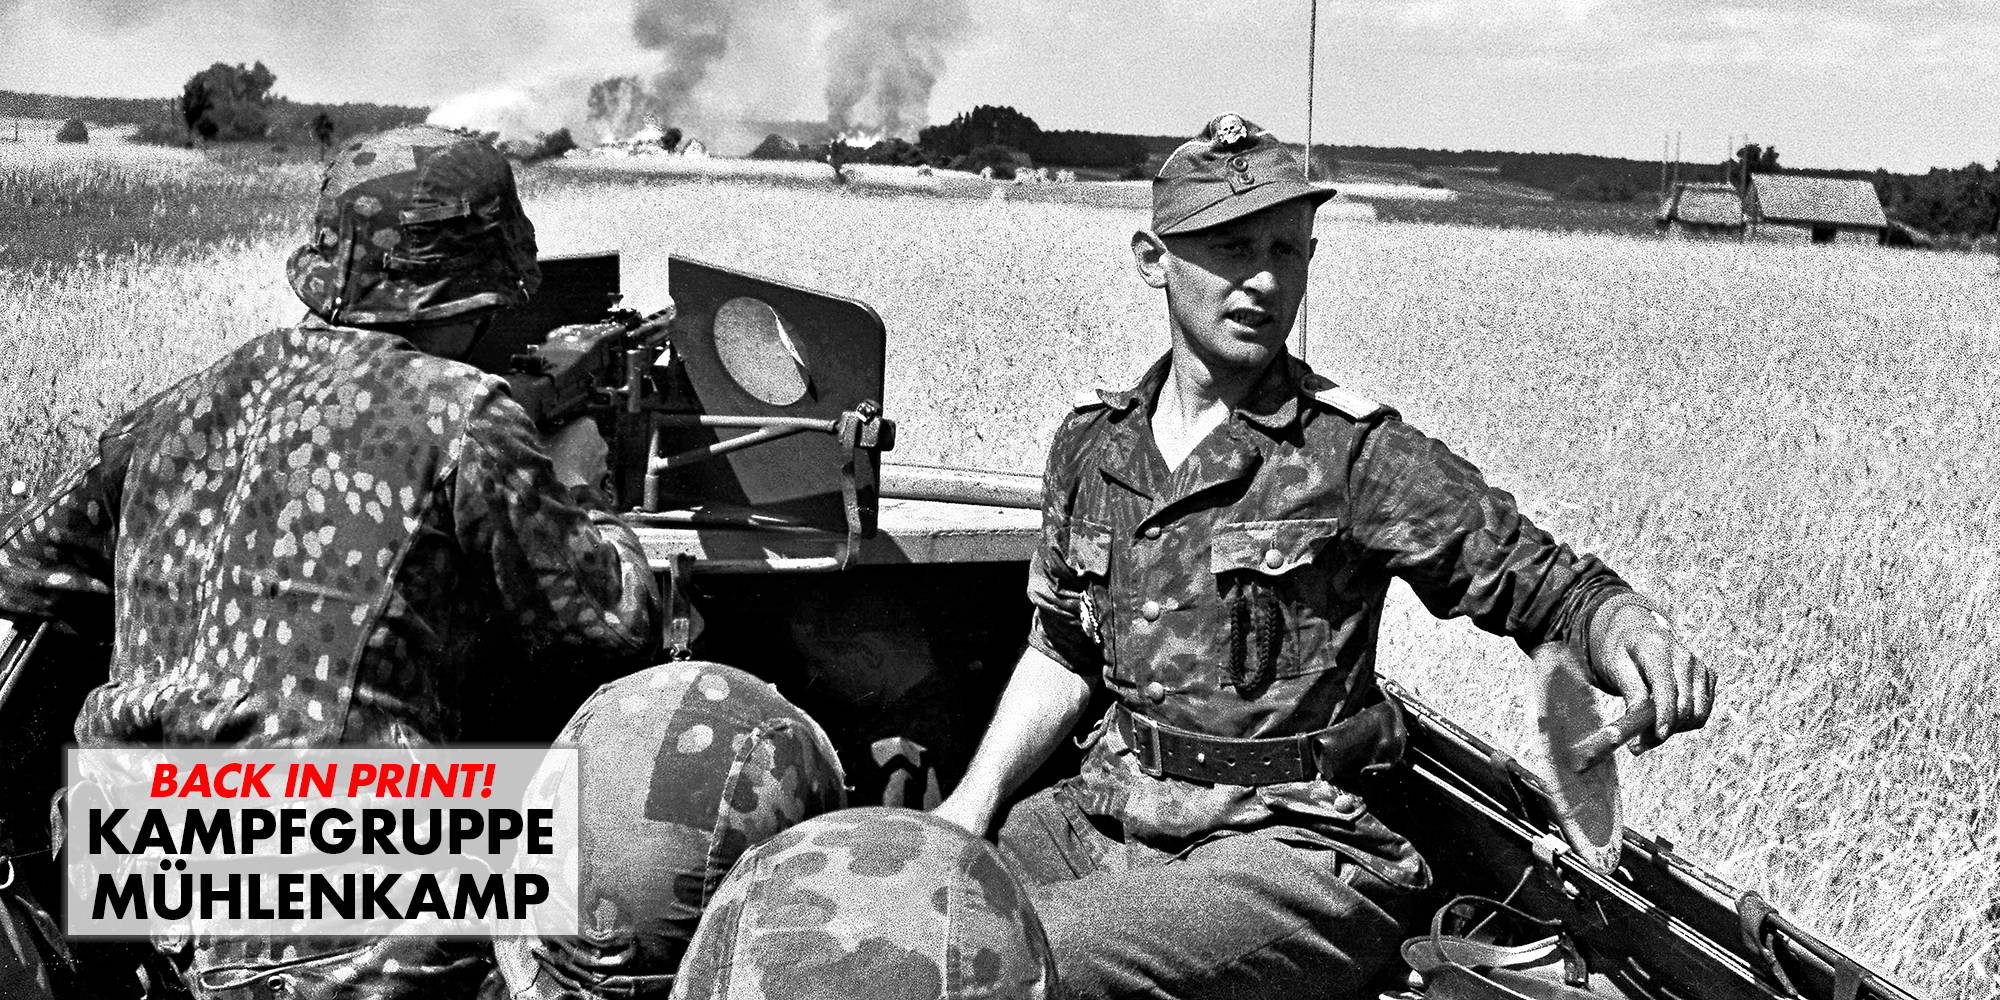 SS-Ustuf. Mahn, uses a two-sided red and white traffic control paddle while another Waffen-SS soldier fires the MG-42 machine gun.